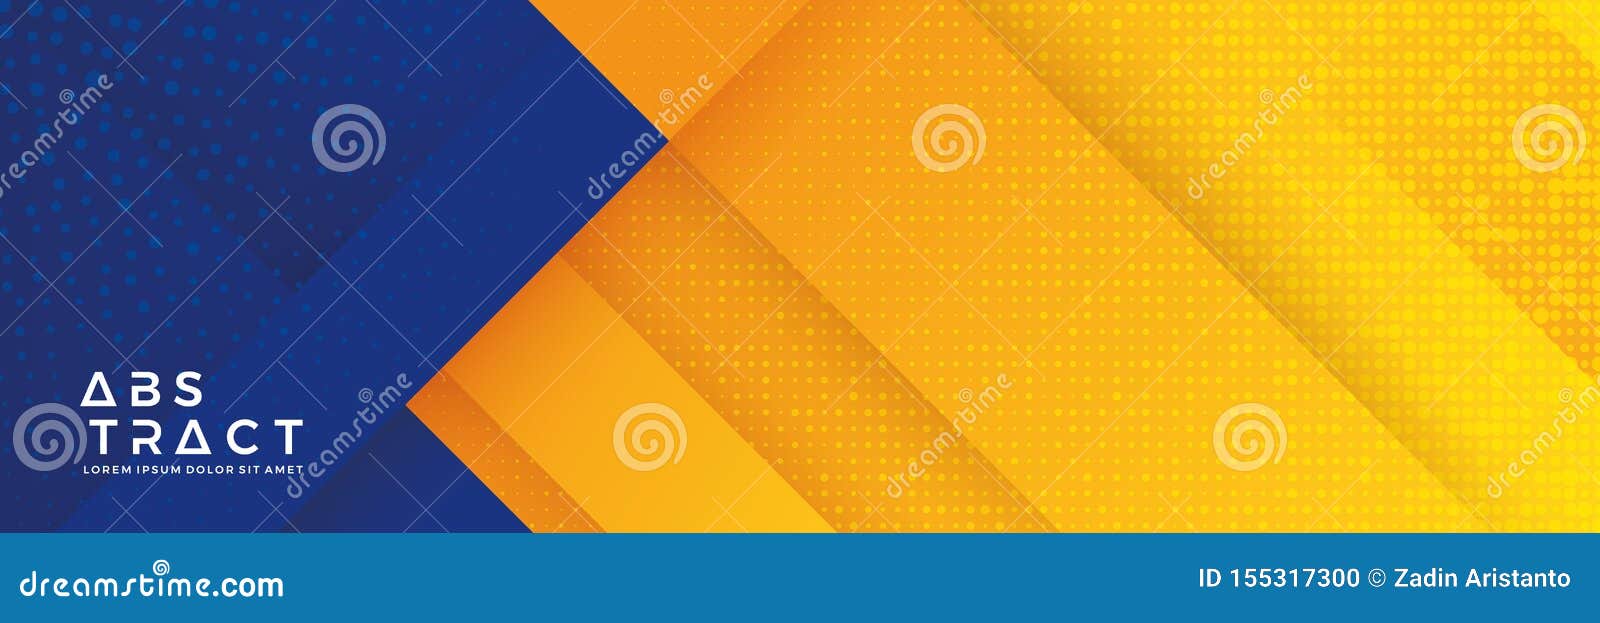 blue background with orange and yellow color composition in abstract. abstract backgrounds with a combination of lines and circle